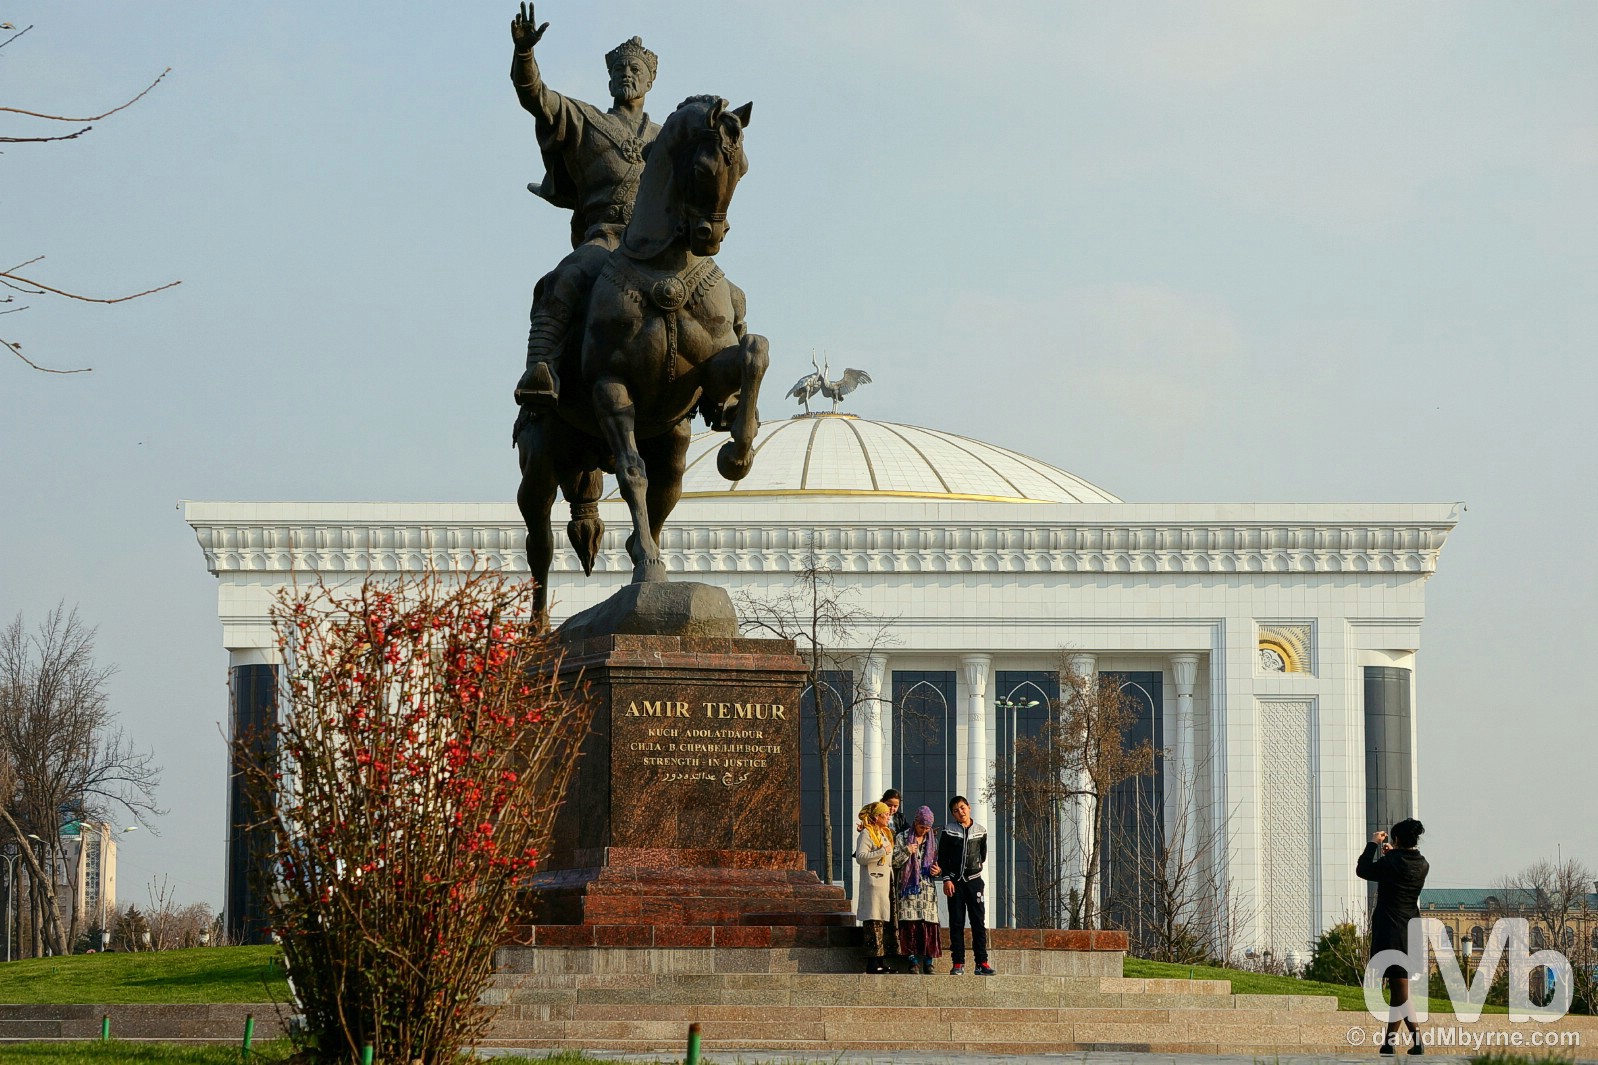 Photo time by the Timur Statue in Amir Timur Maydoni, the ceremonial centre of Tashkent, Uzbekistan. March 5, 2015.